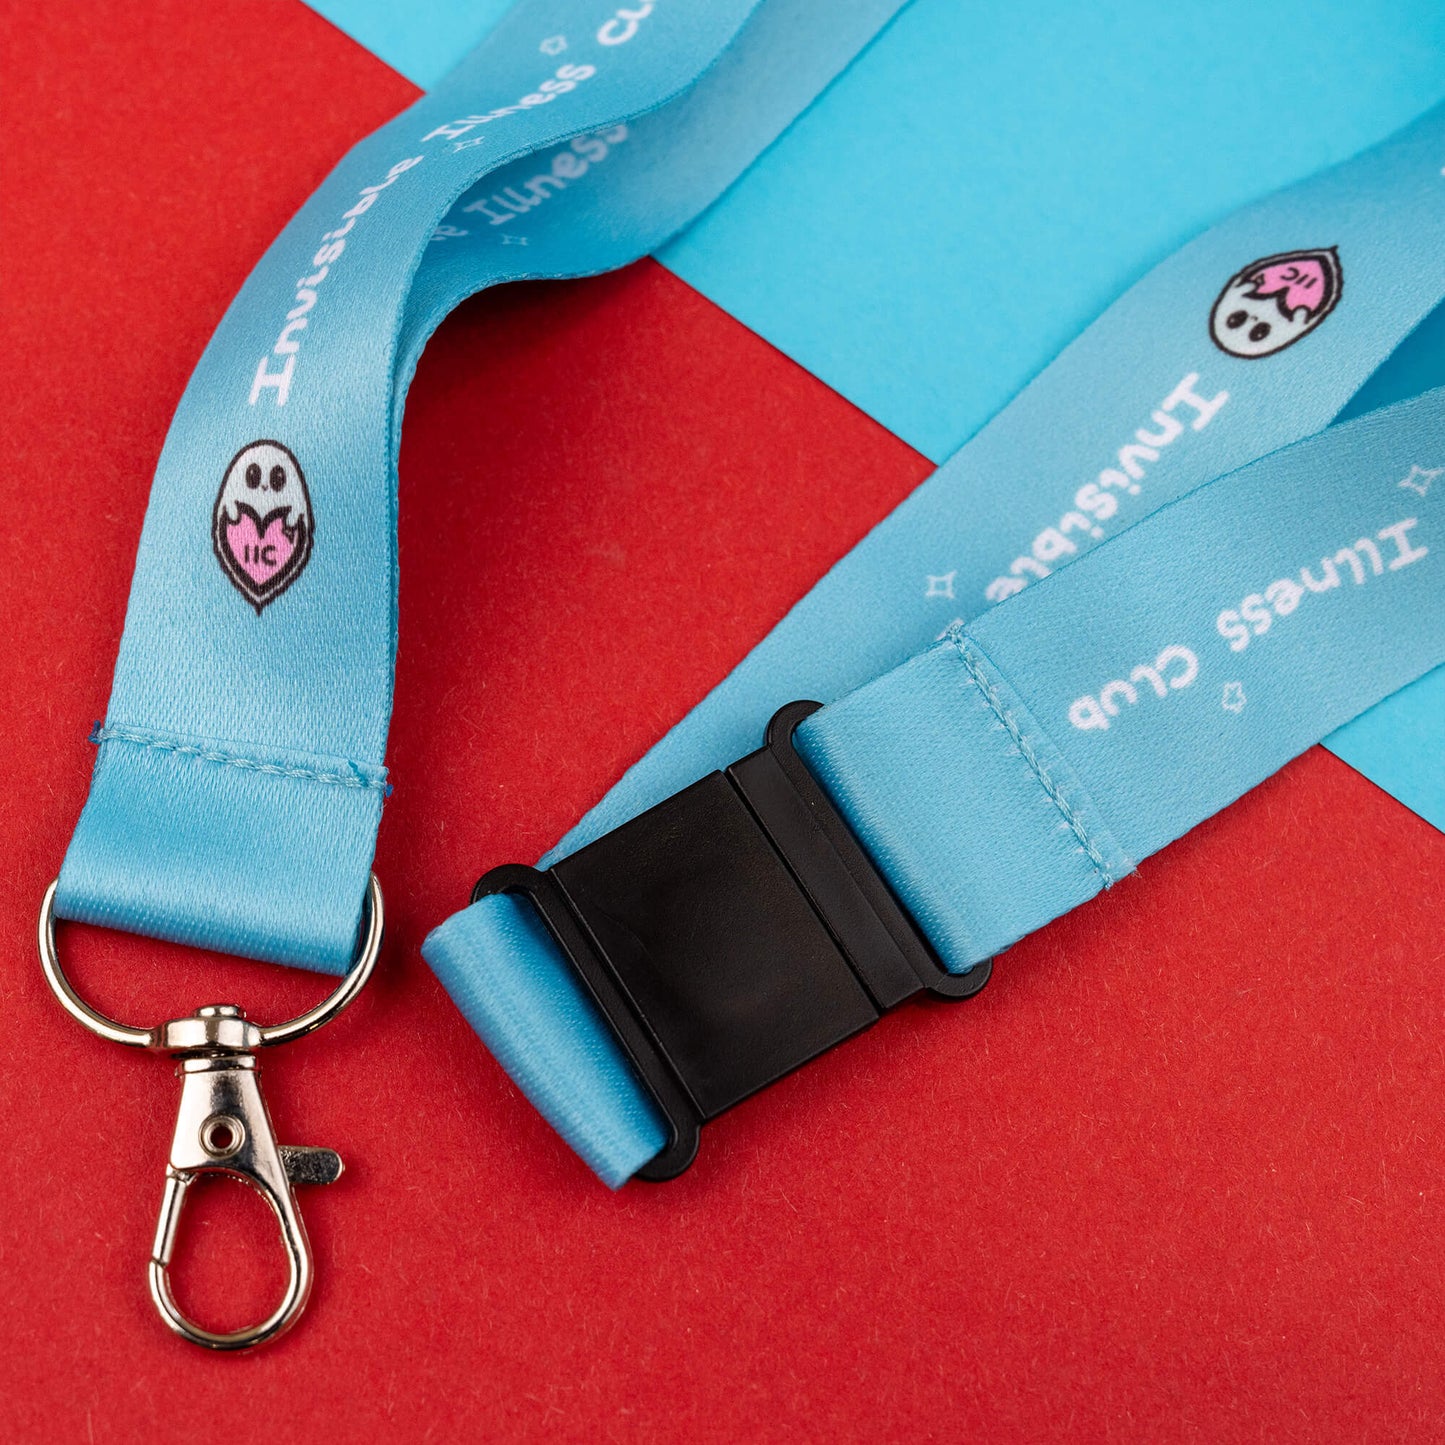 Light blue lanyard with 'Invisible Illness Club' text and a cute ghost logo, fitted with a black buckle and metal clasp. This lanyard is designed to raise awareness for invisible illnesses and is displayed against a red and blue geometric background.